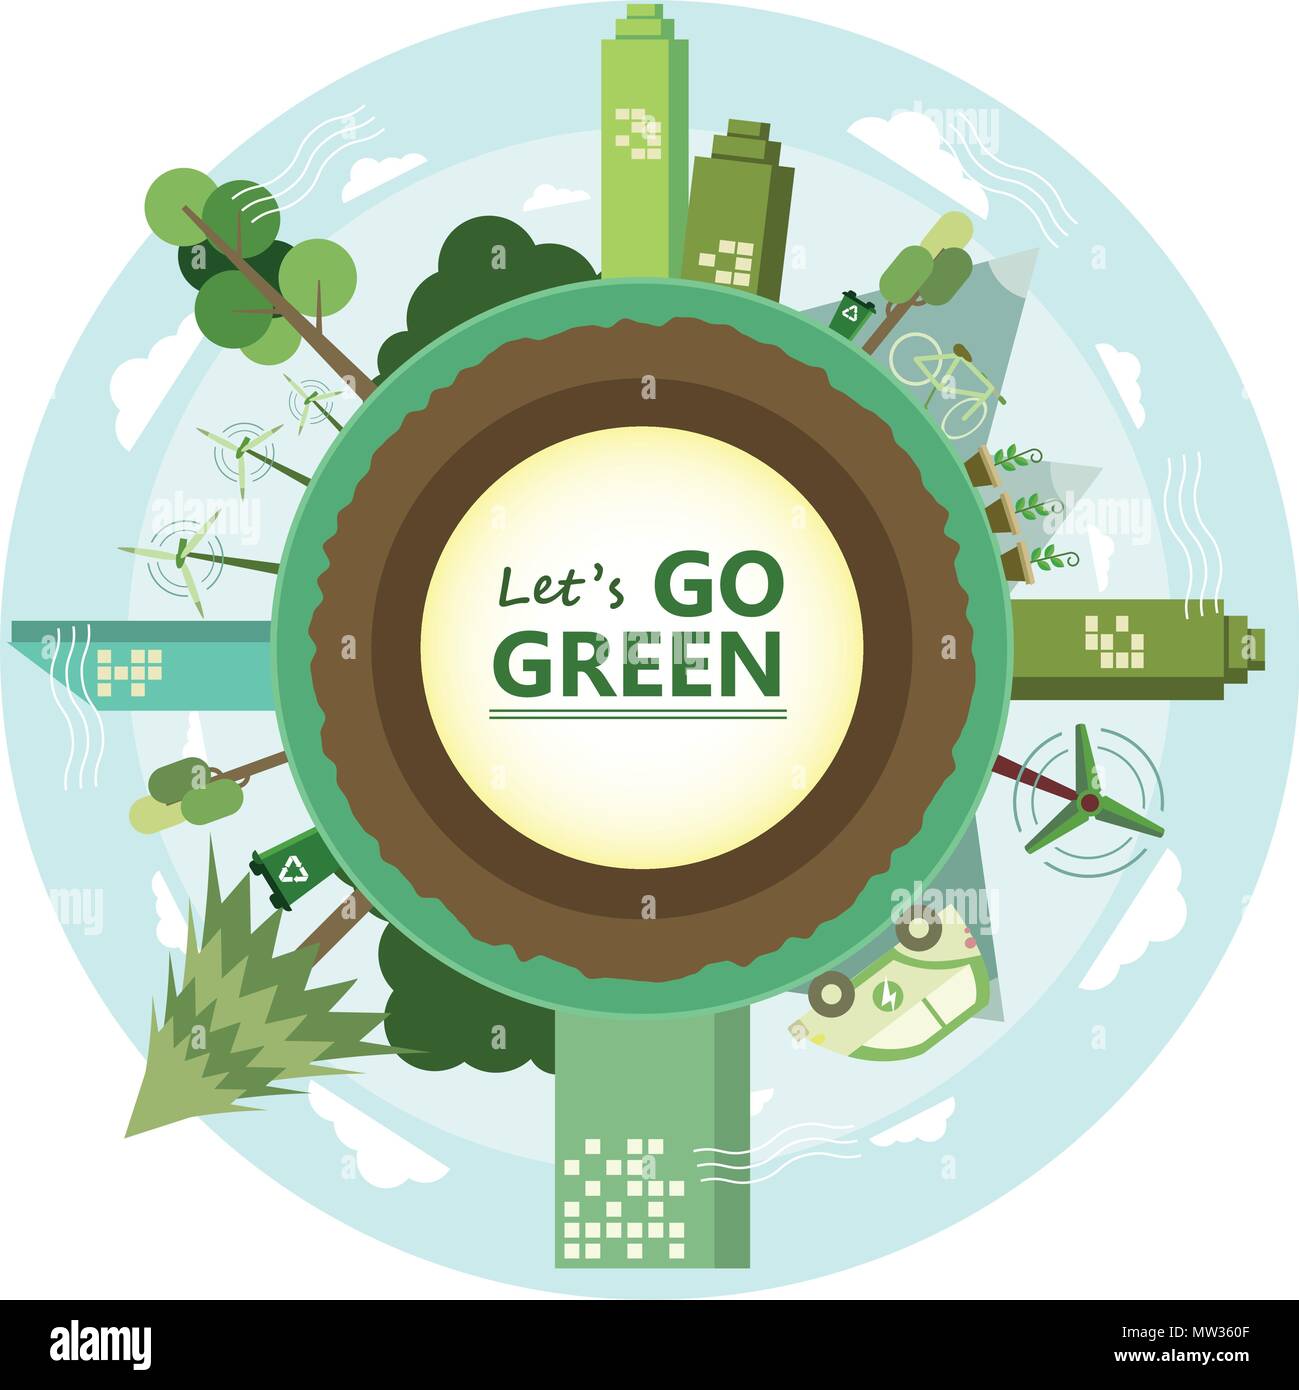 Lets Go green,get the fresh air for our life.and please protect the trees . Stock Vector